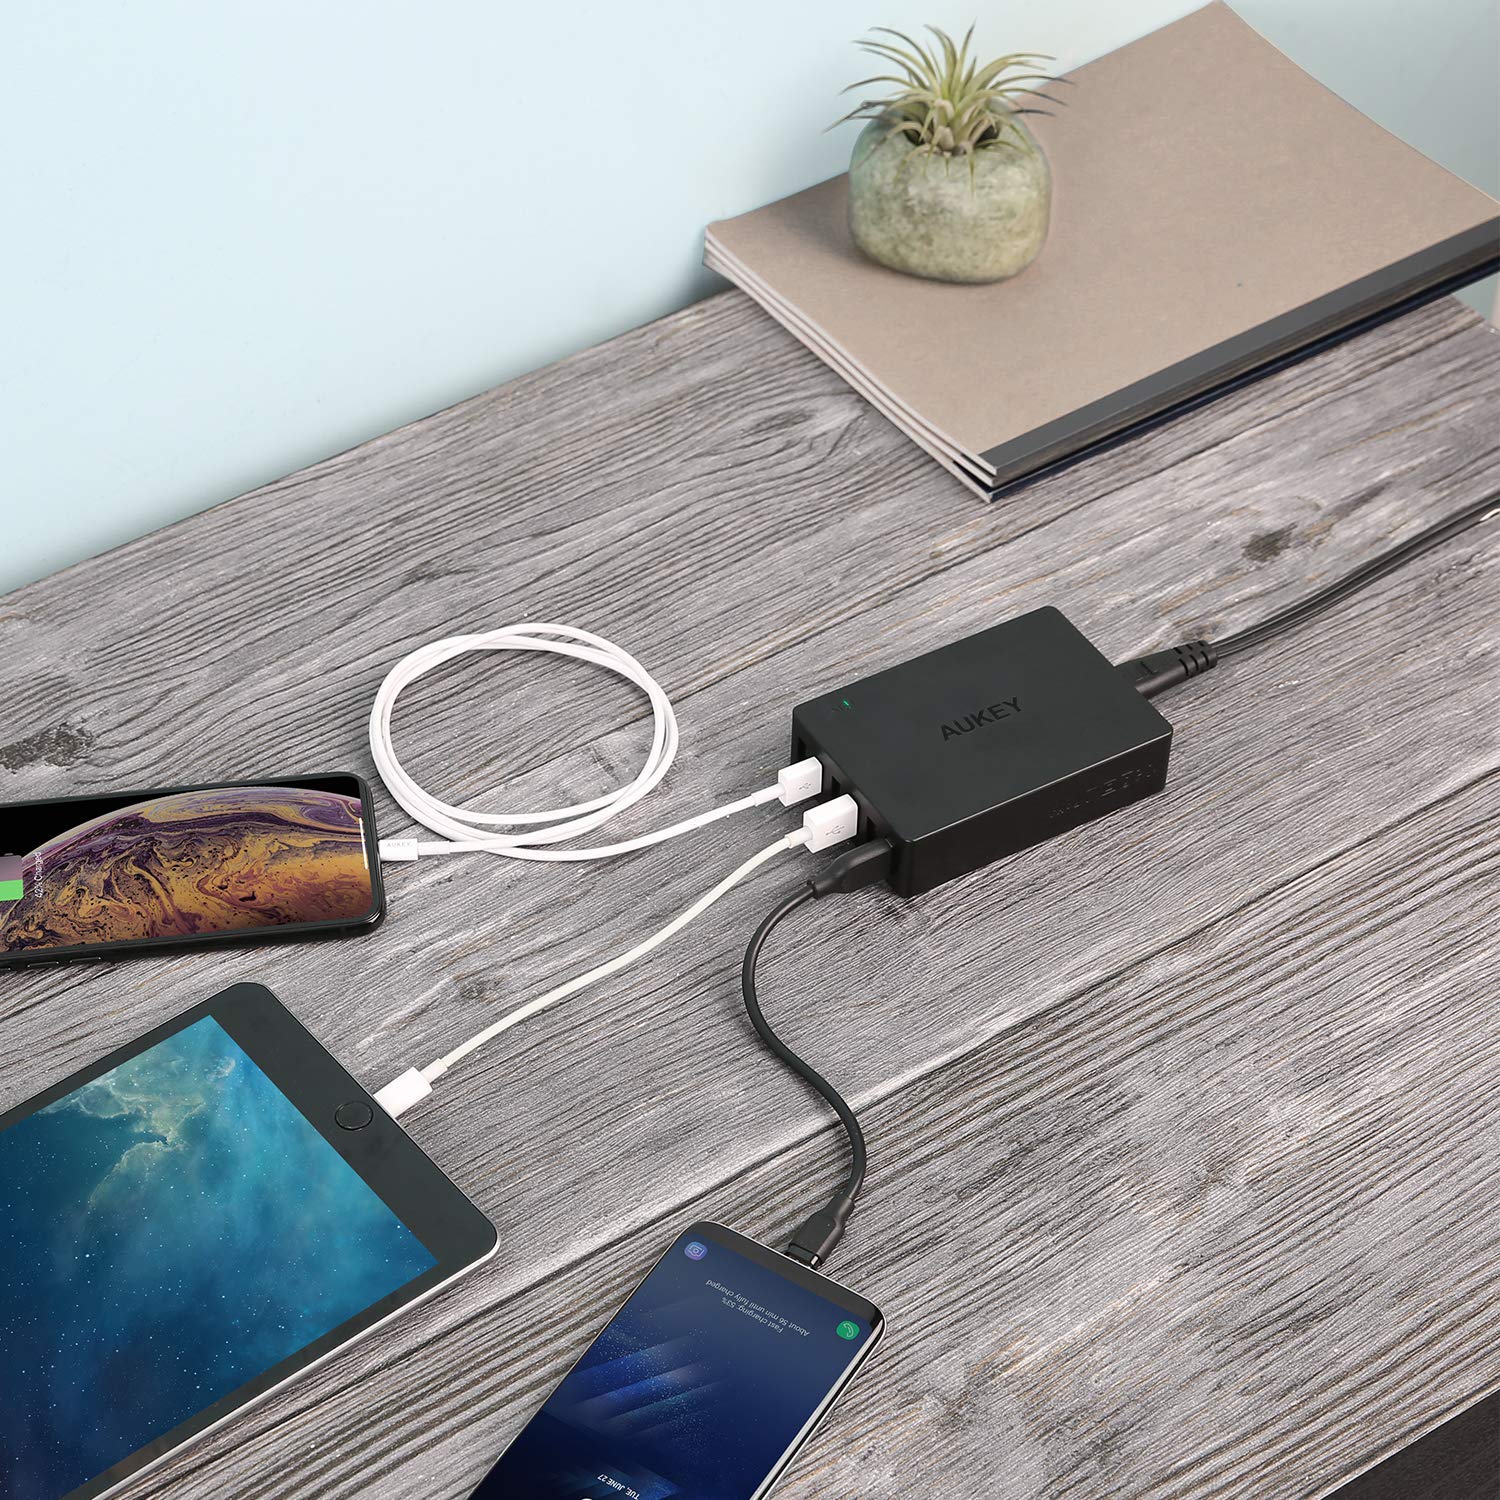 Aukey 60W 6 port usb charger